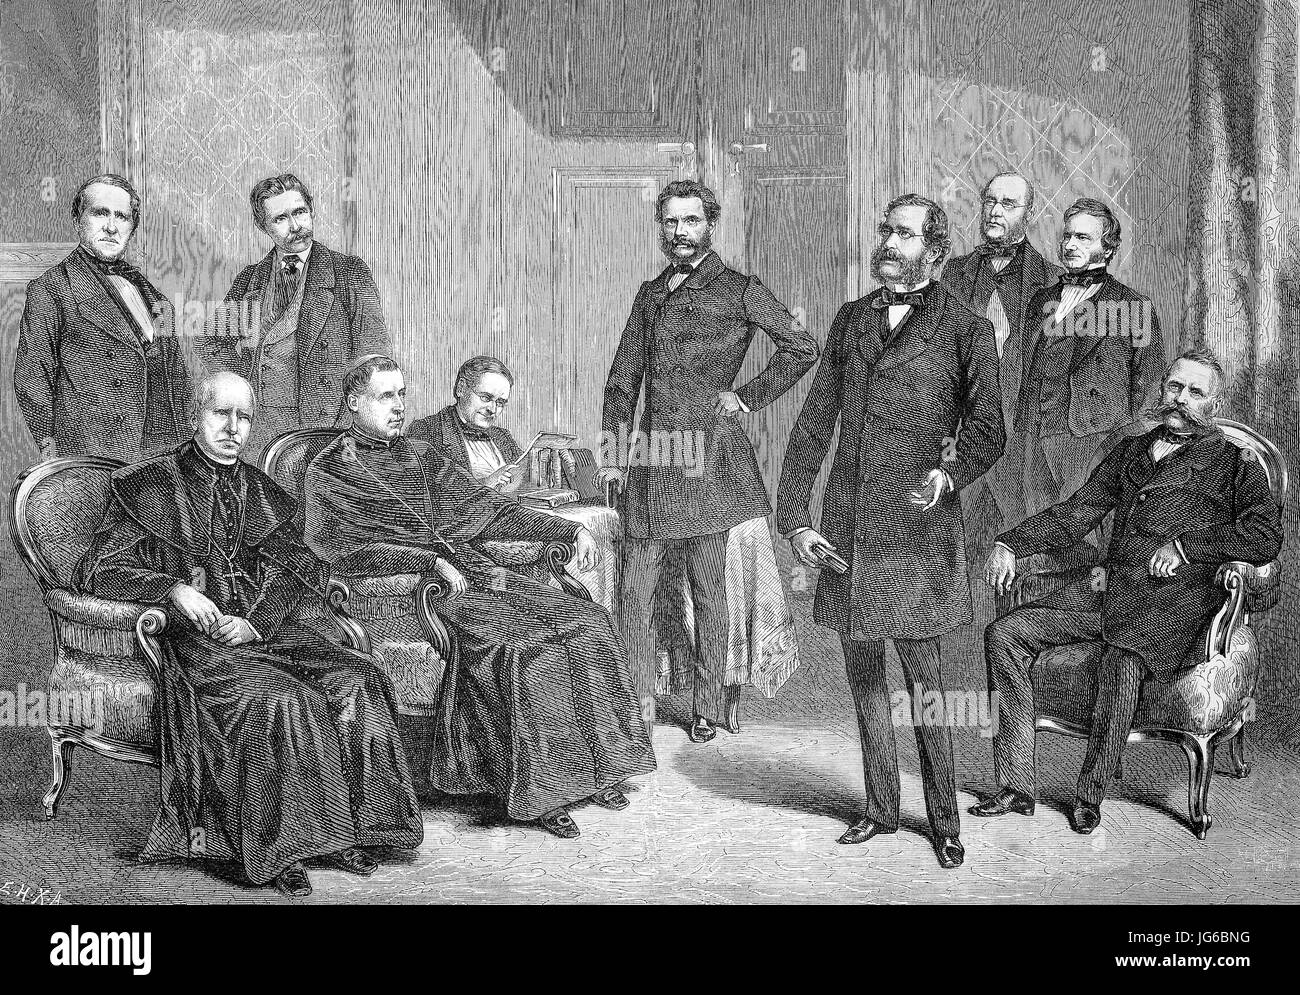 Digital improved:, conference in the House of Lords in Vienna, Austria, Professor Arndts, Cardinal Rauscher, Cardinal Prince Schwarzenberg, Count Thun, Count Auersperg, Professor Rokitansky, Freiherr Lichtenfels, President Colloredo, illustration from the 19th century Stock Photo